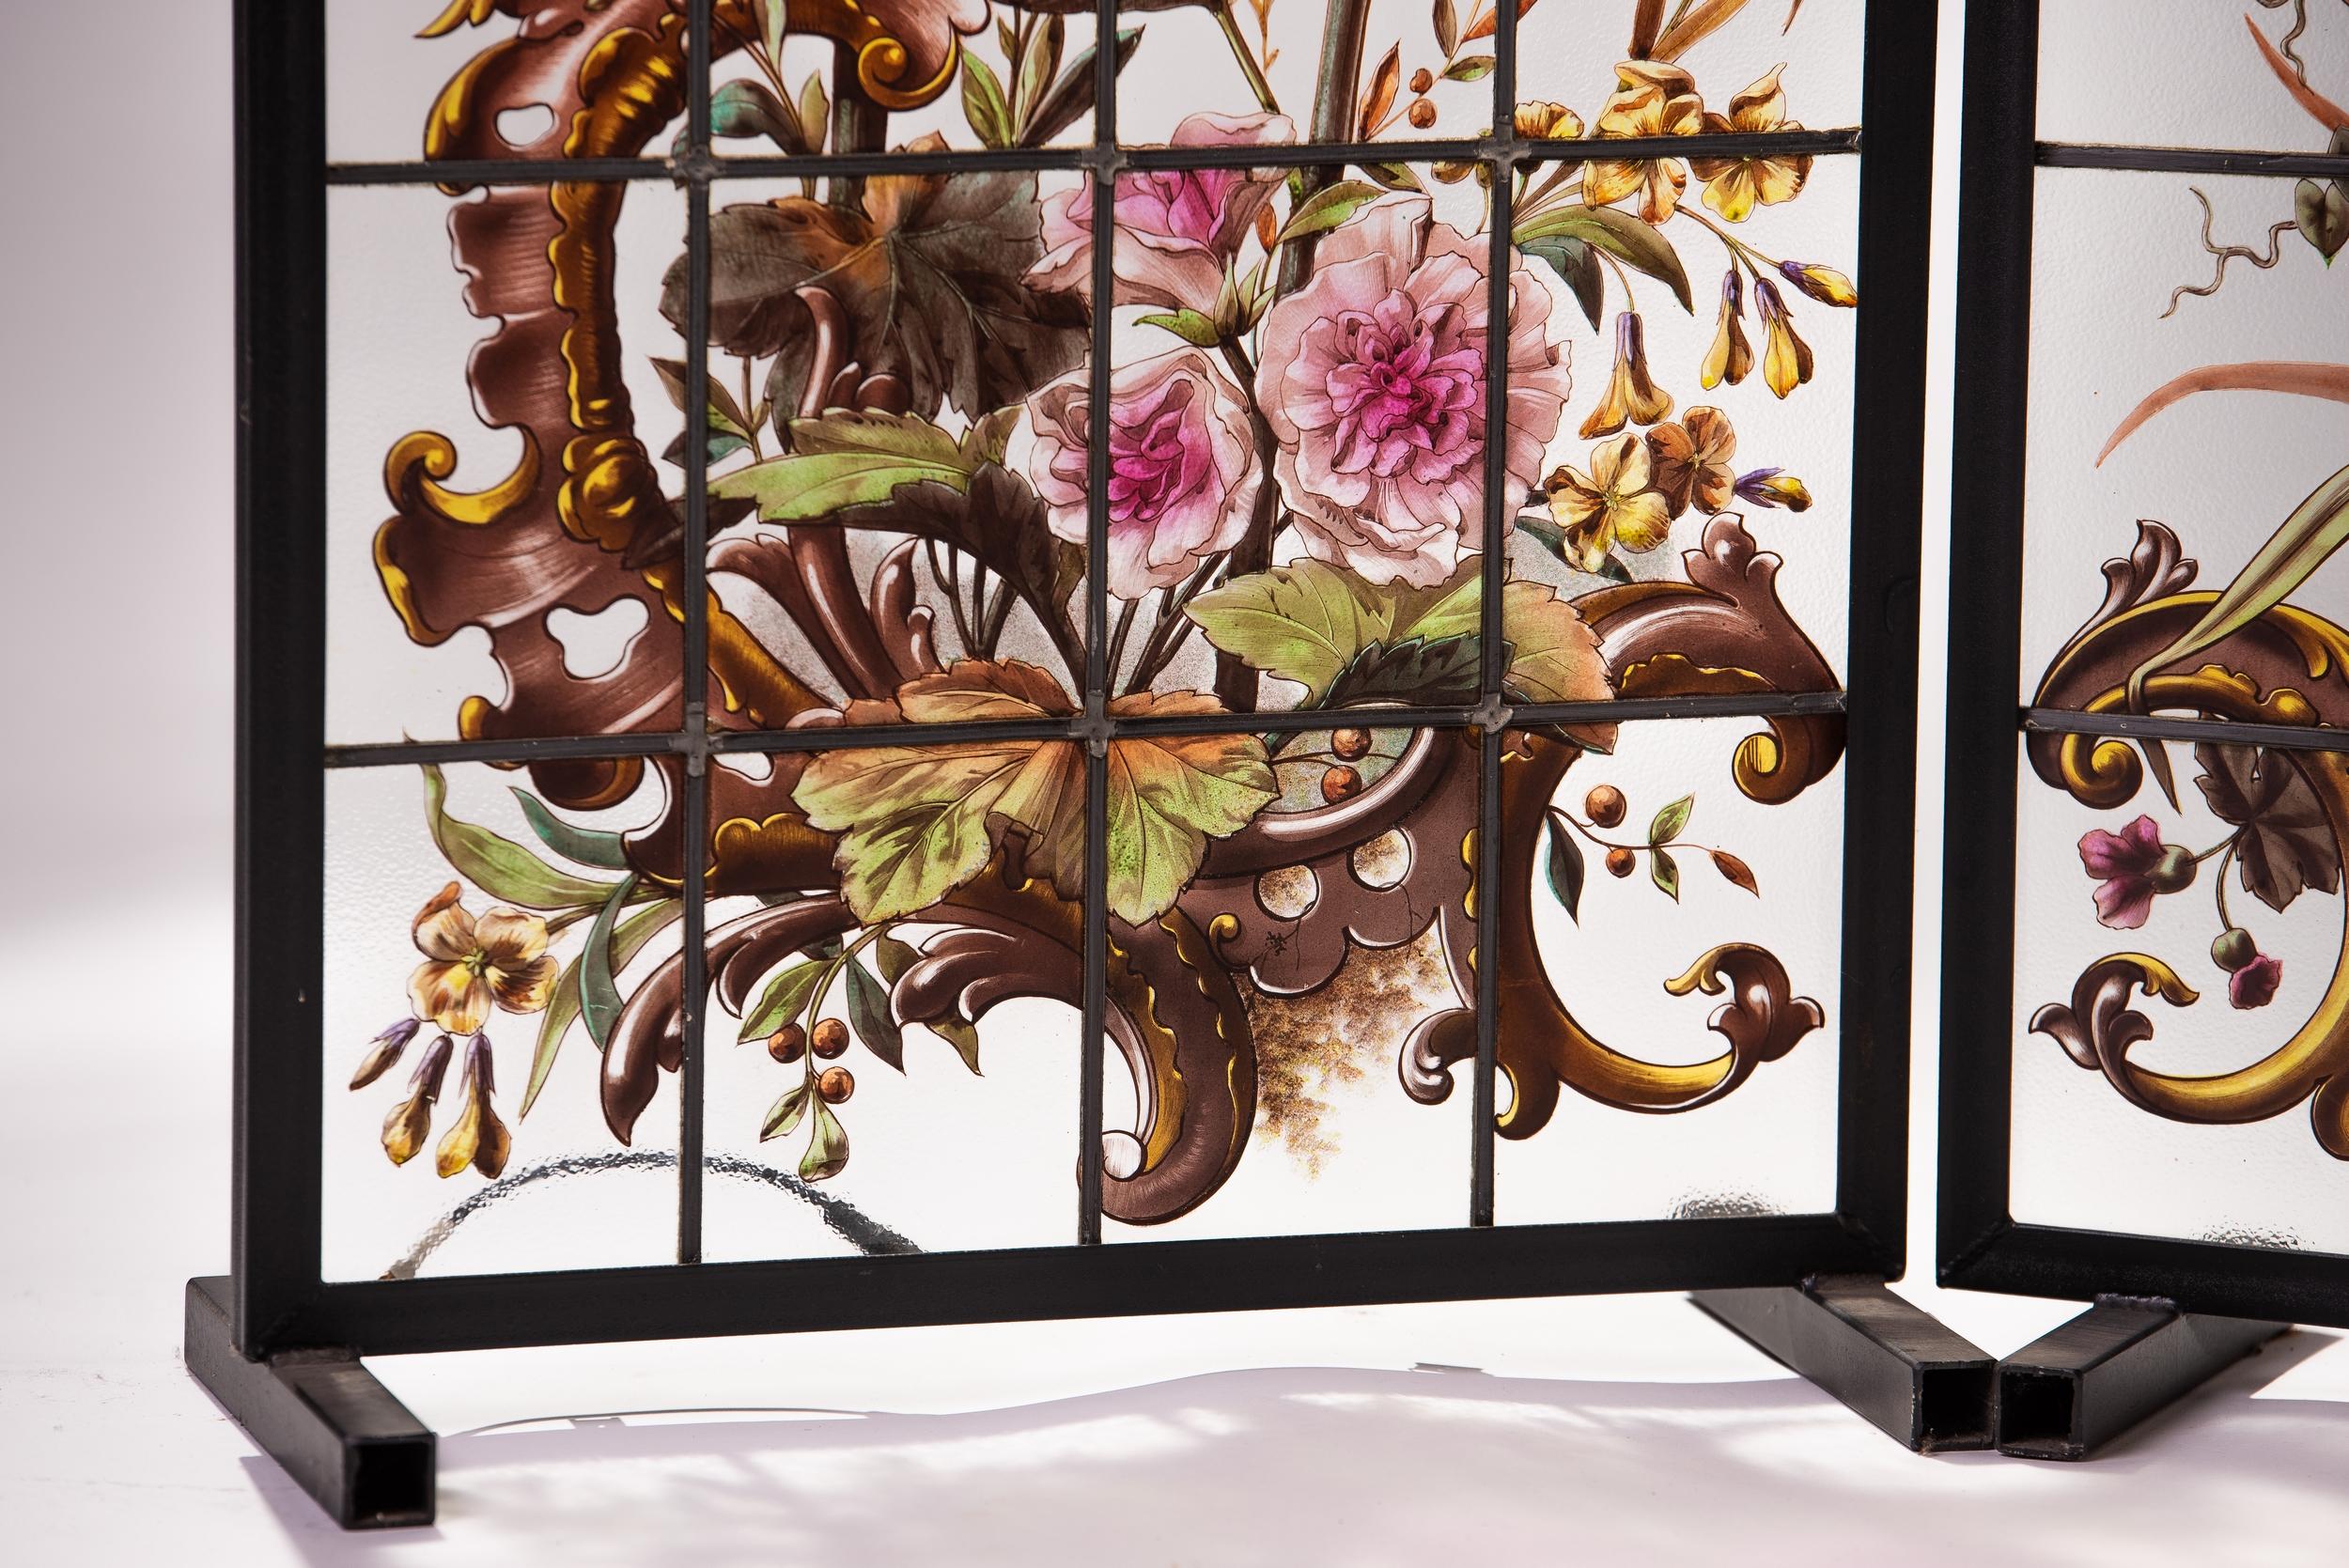 Pair of stained-glass panels (a window), decoration painted with enamel of flowers, cornucopia, bird and insects, France, circa 1880.
In perfect condition.
Measures: Height is 126.5 cm
Each panel measuring 46.5 cm wide.